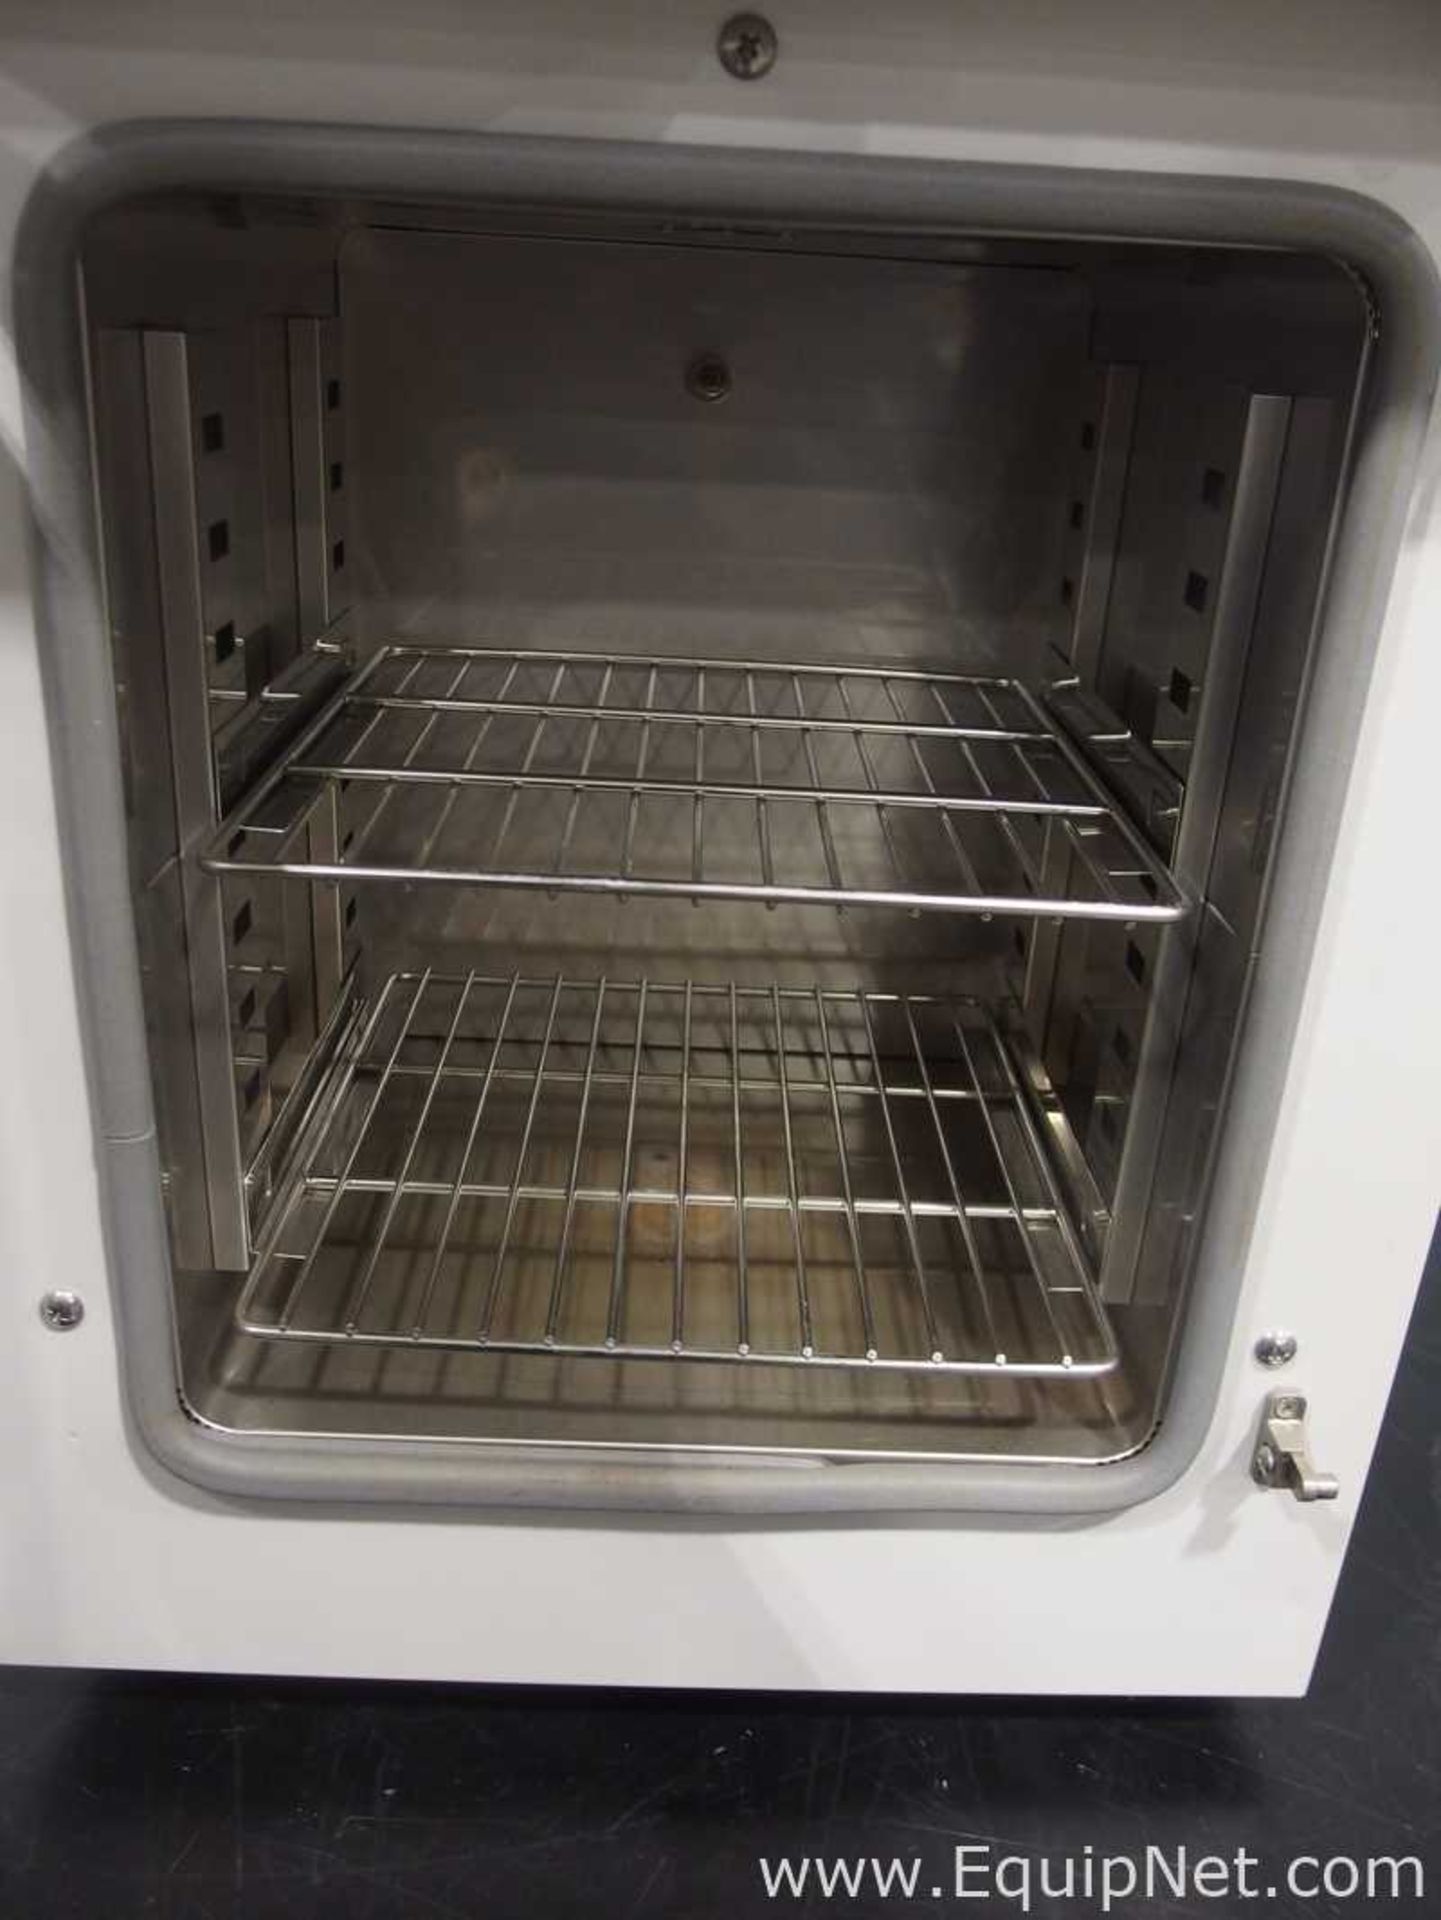 VWR 414005-106 Gravity Convection Oven - Image 6 of 8